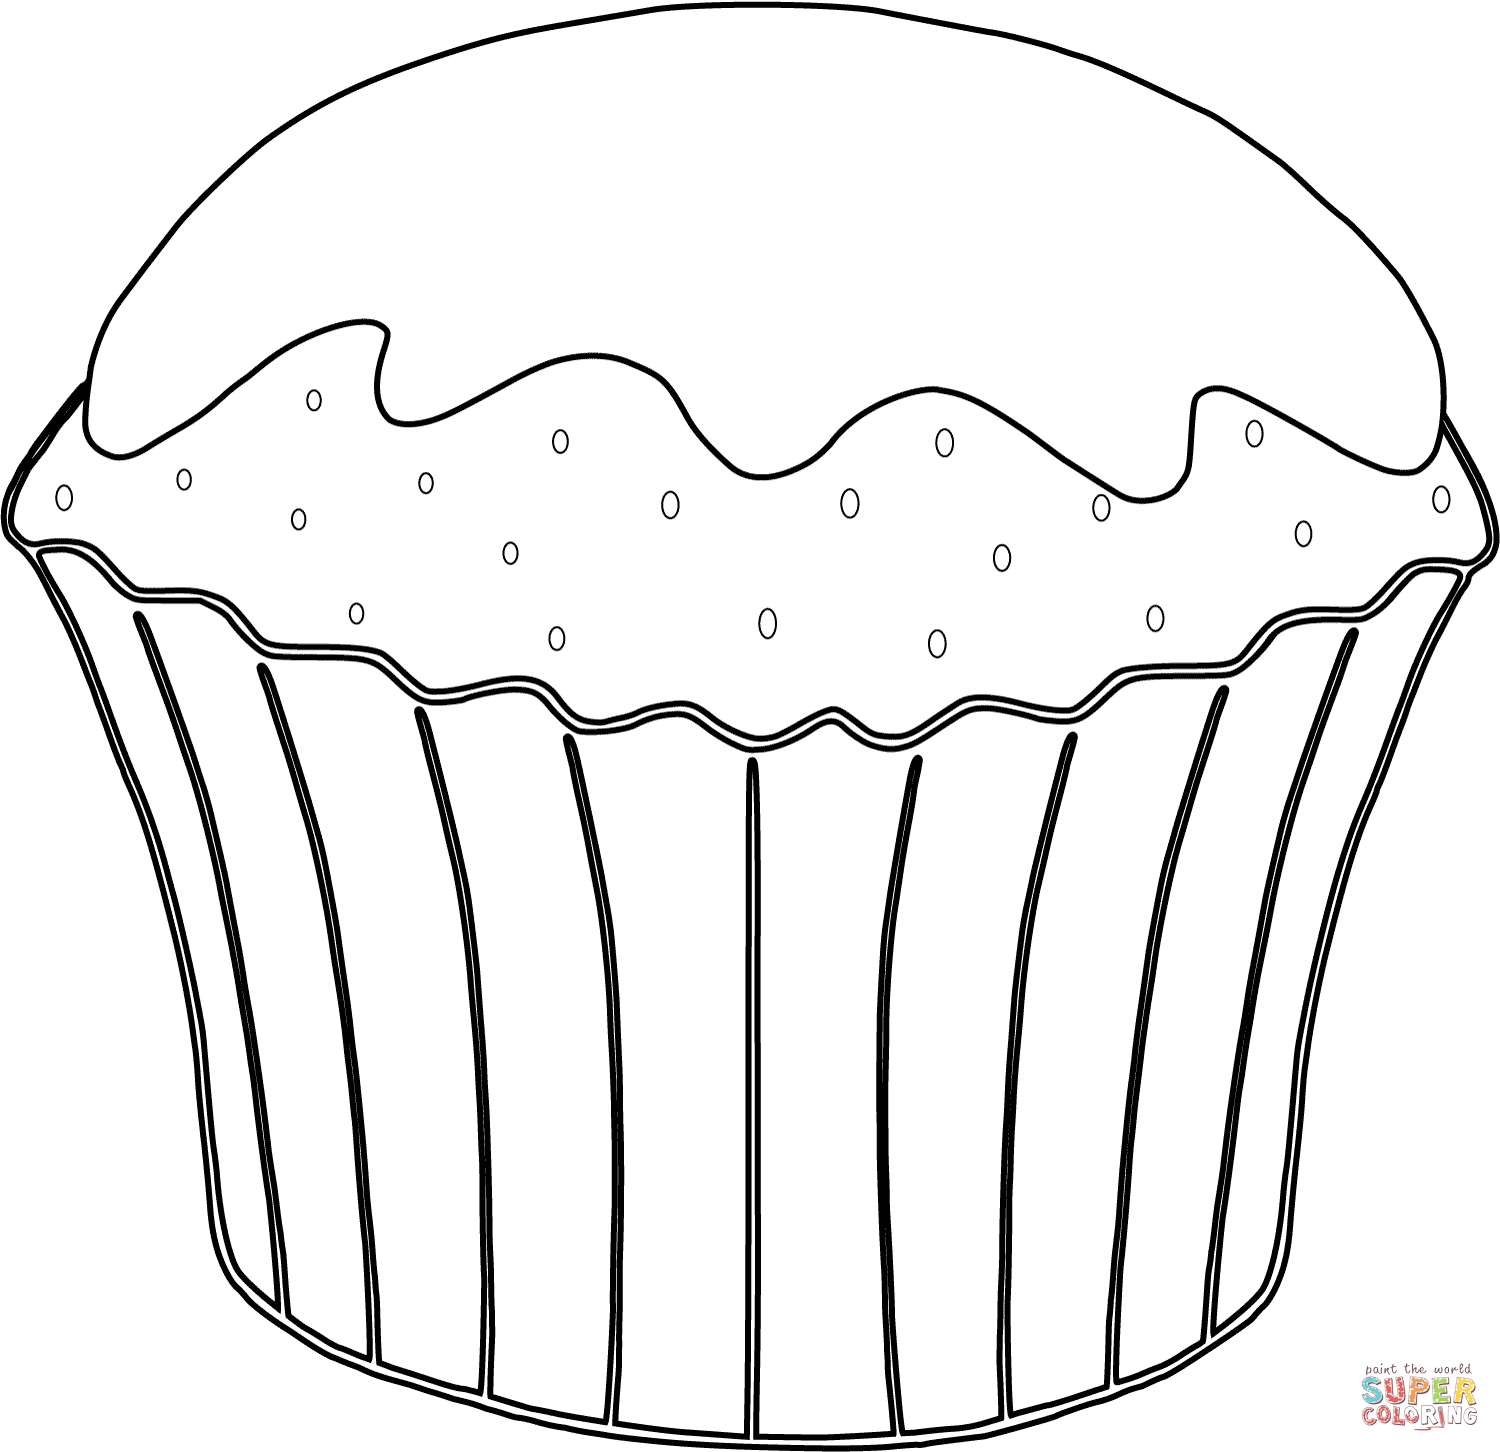 Muffin coloring page | Free Printable Coloring Pages